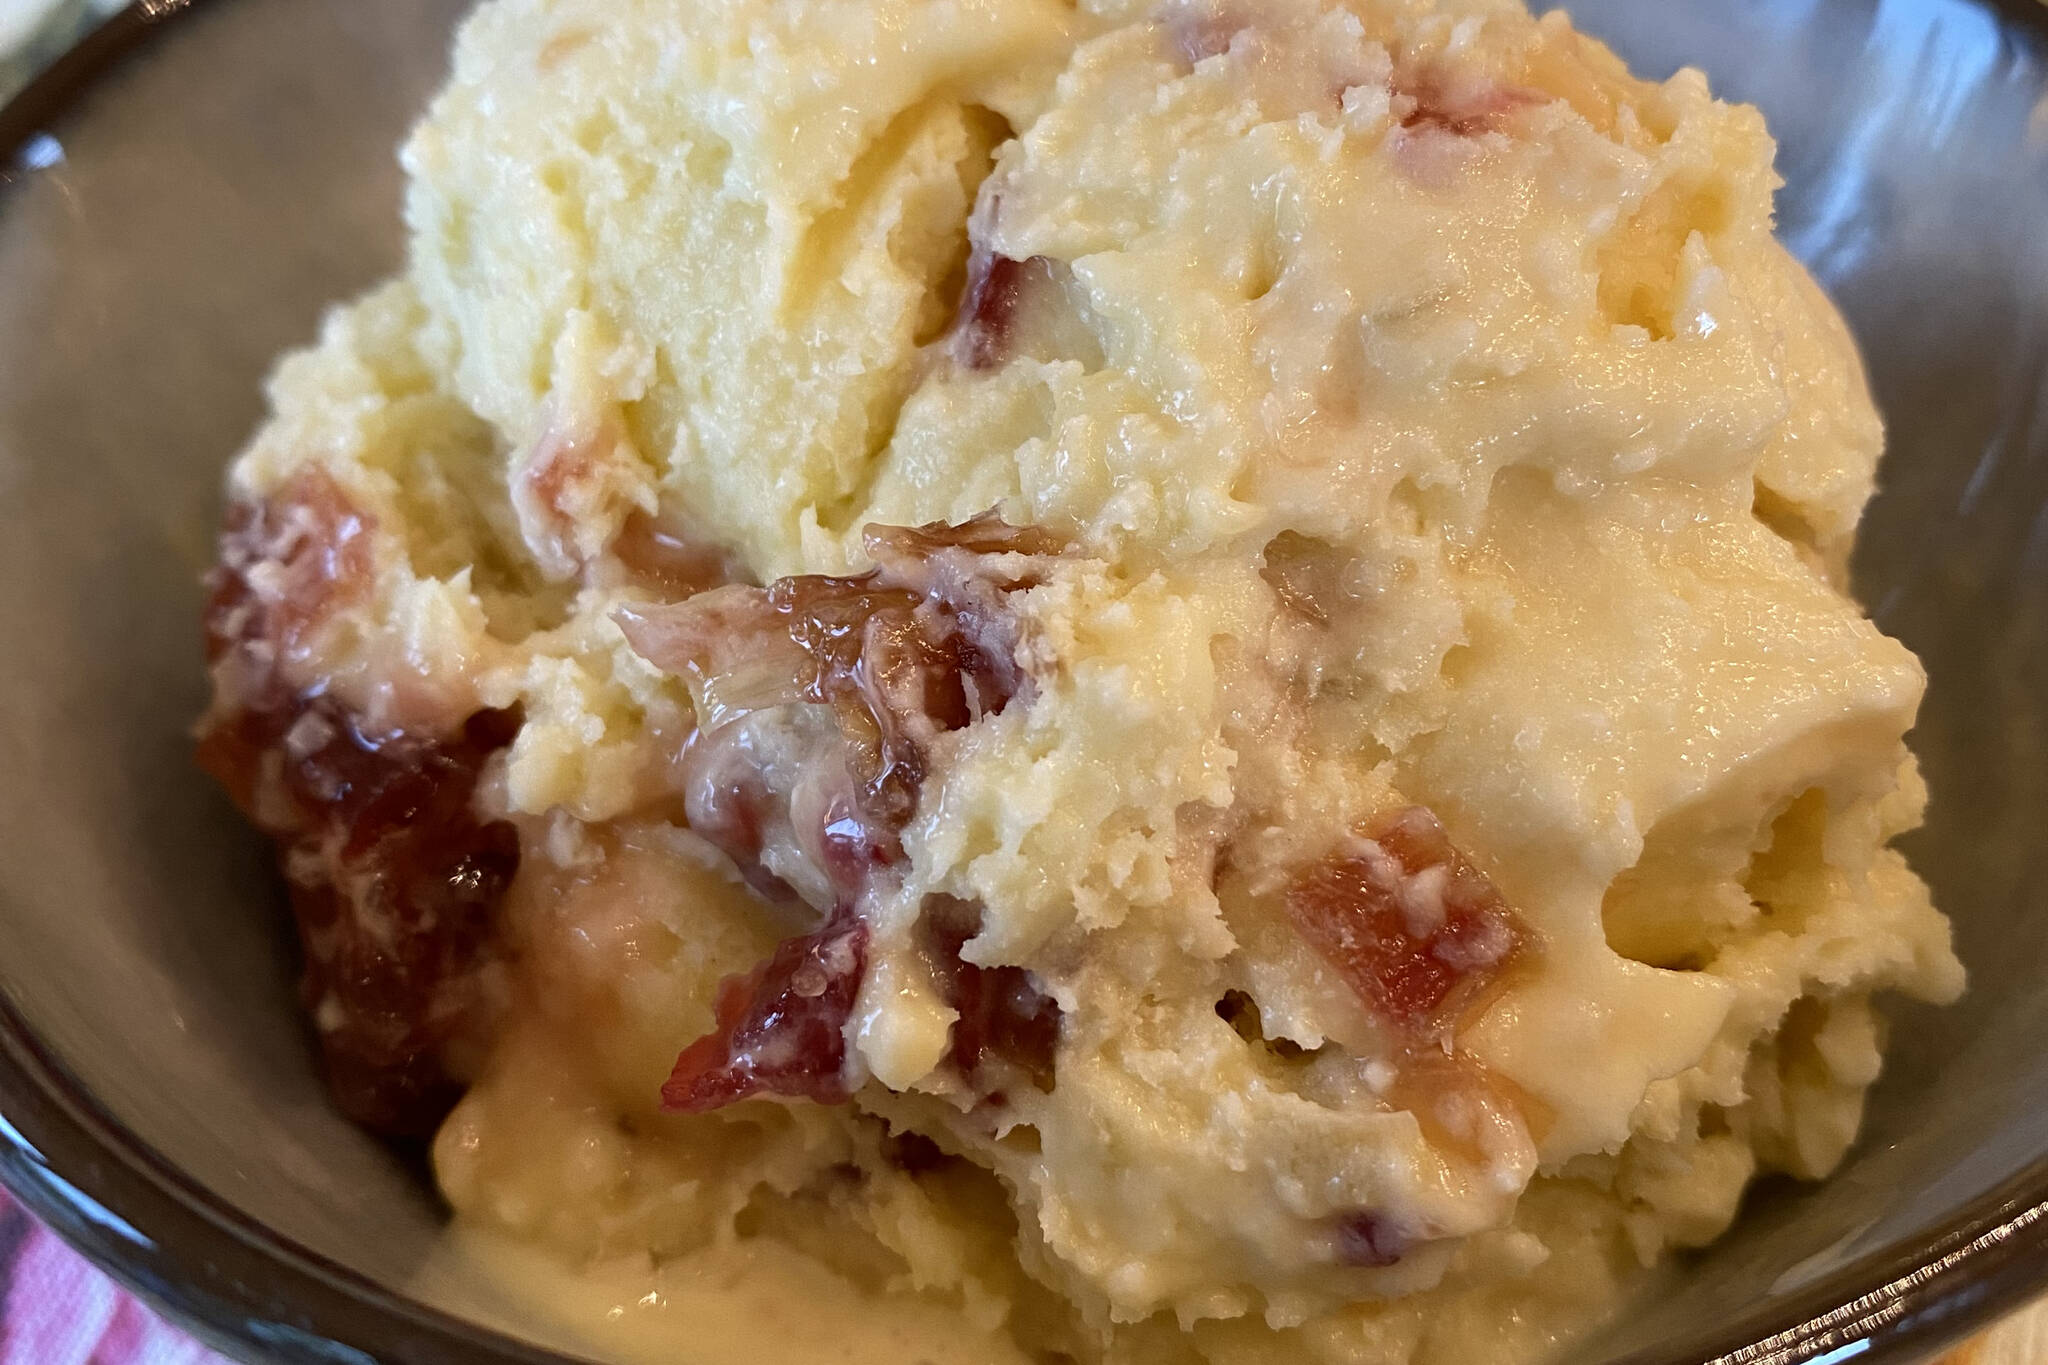 Homemade rhubarb ice cream is served. (Photo by Tressa Dale/Peninsula Clarion)